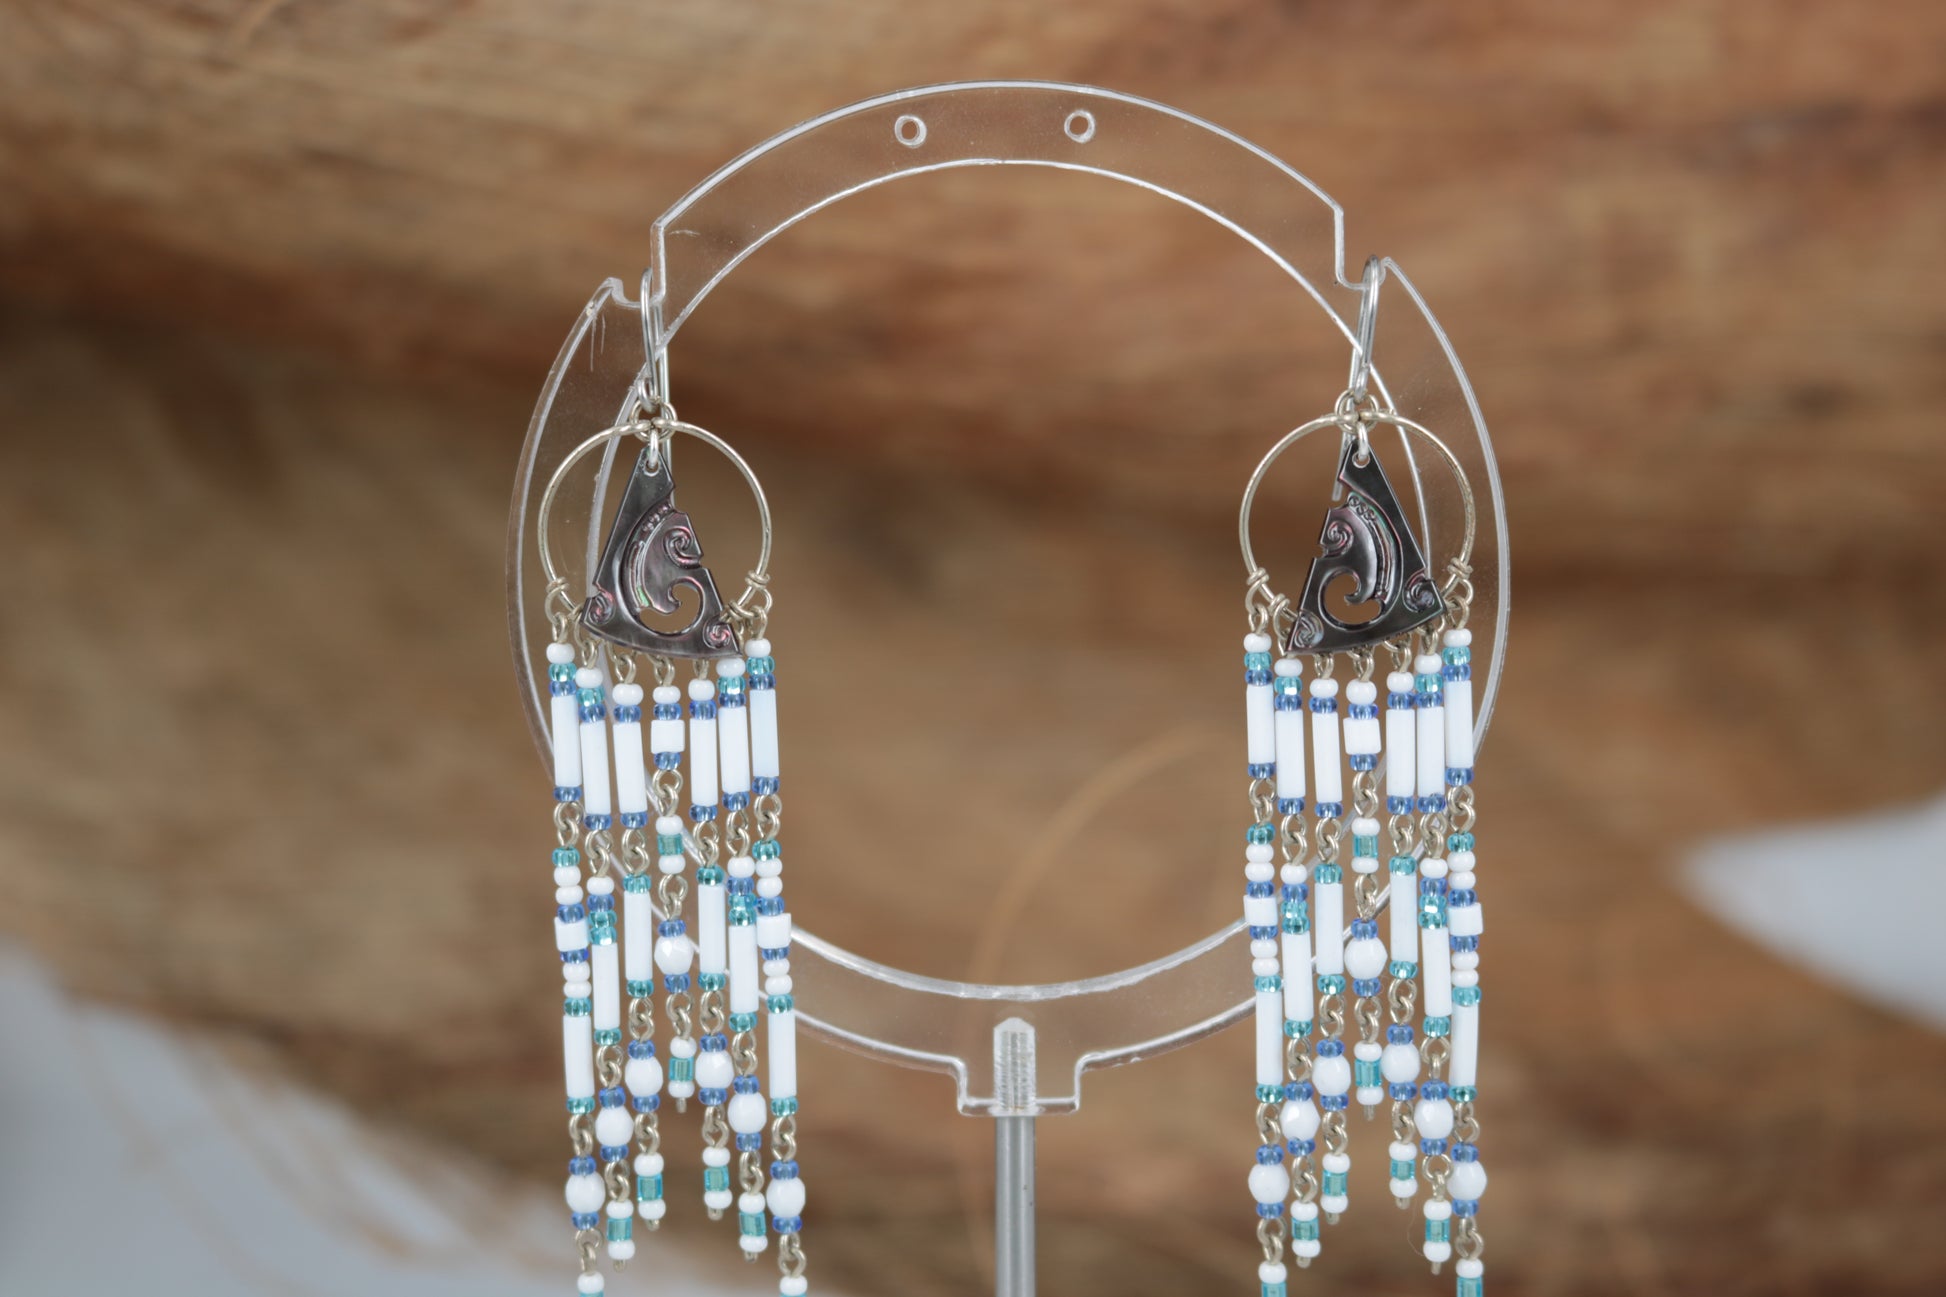 Boho style earrings with Tahitian designed mother of pearl